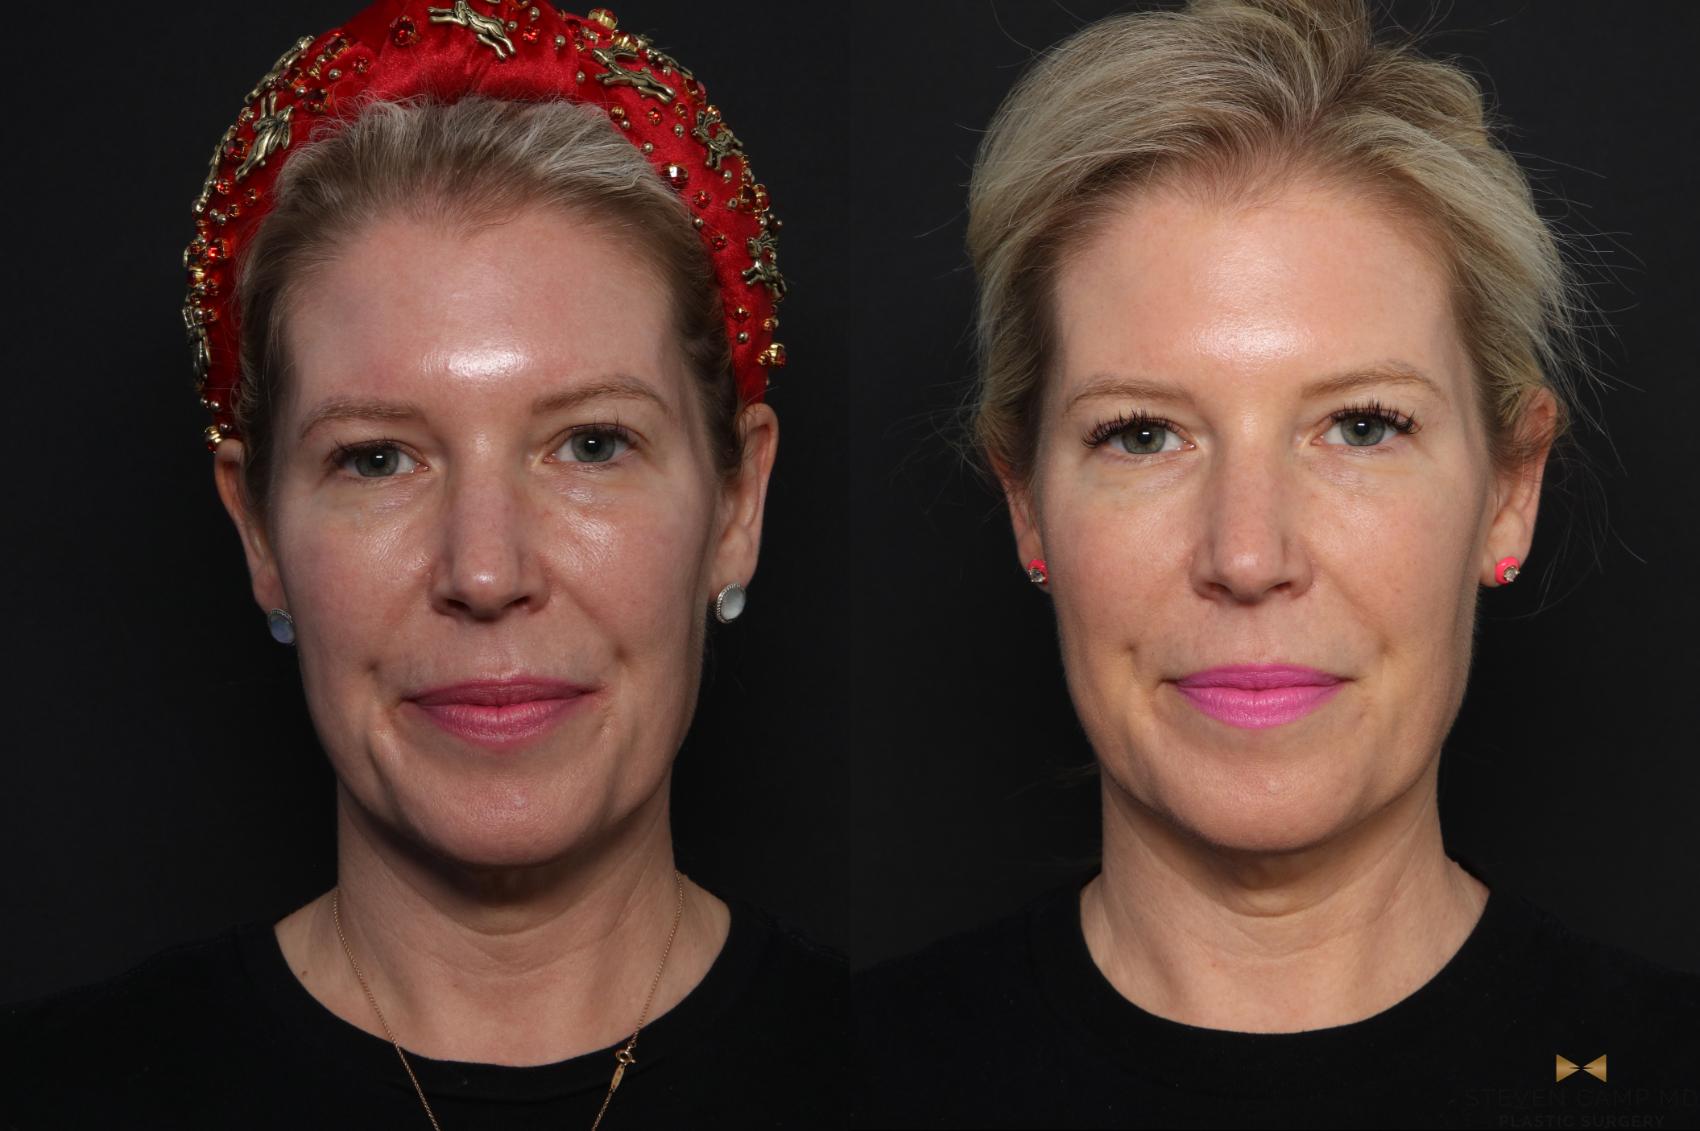 Sciton Laser Before & After Photo | Fort Worth, Texas | Steven Camp MD Plastic Surgery